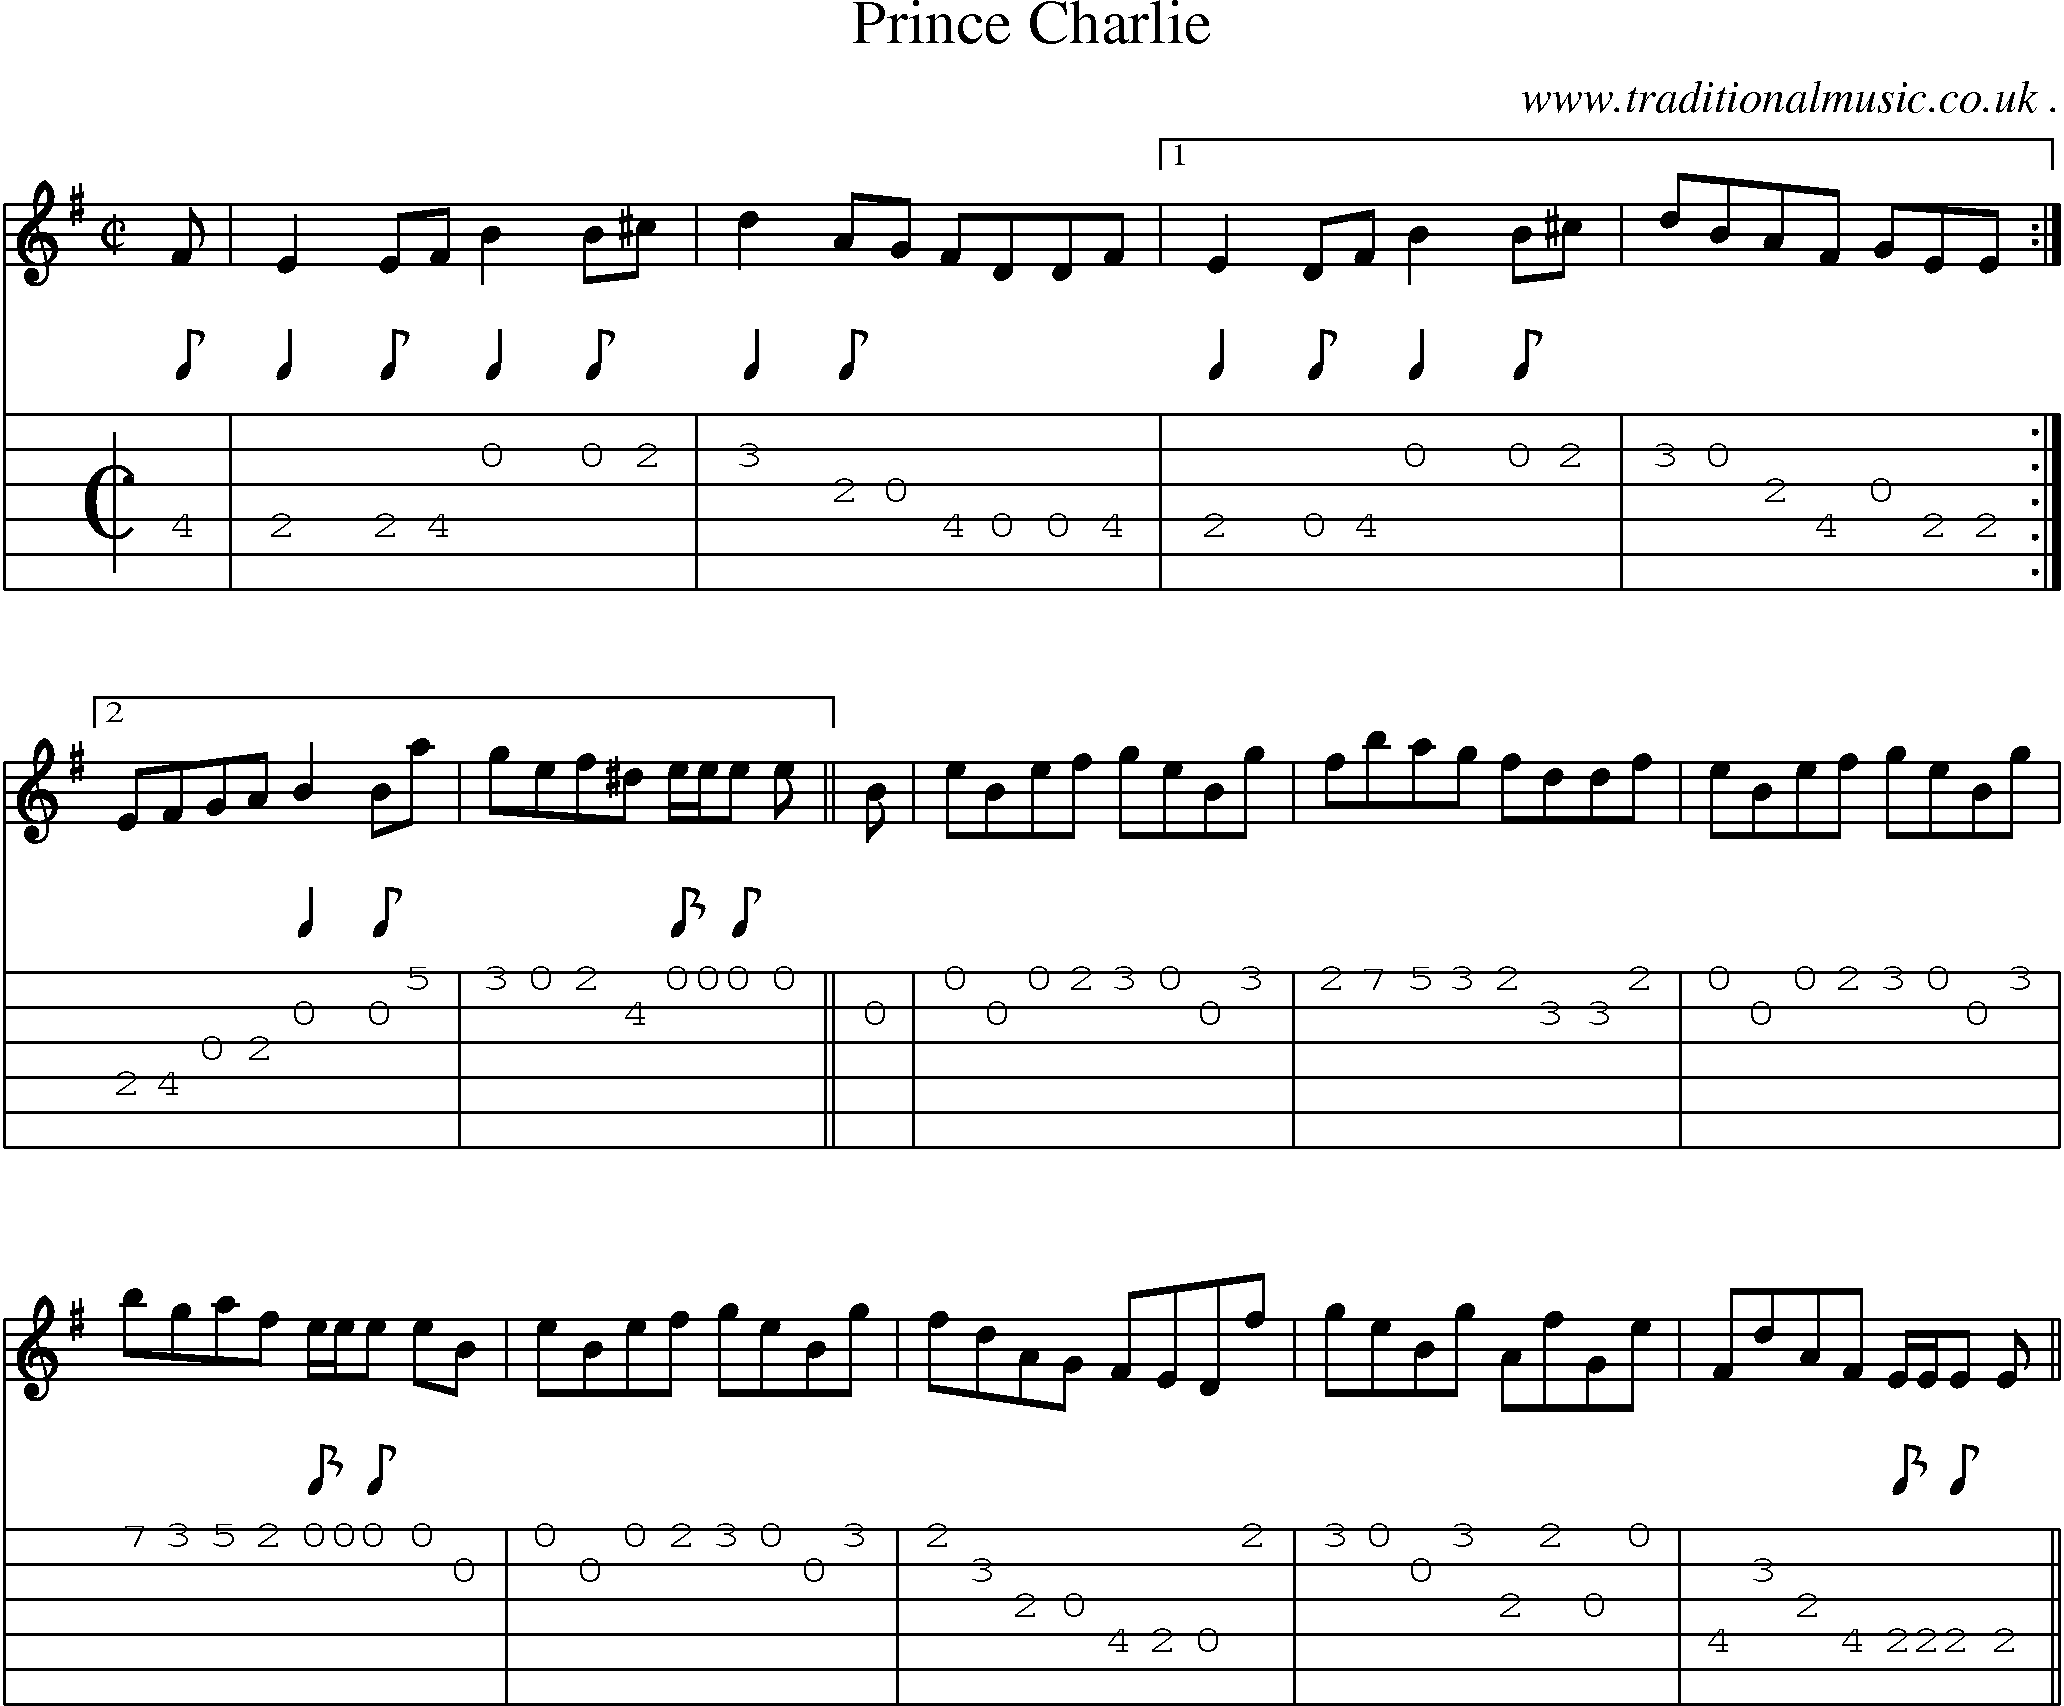 Sheet-music  score, Chords and Guitar Tabs for Prince Charlie